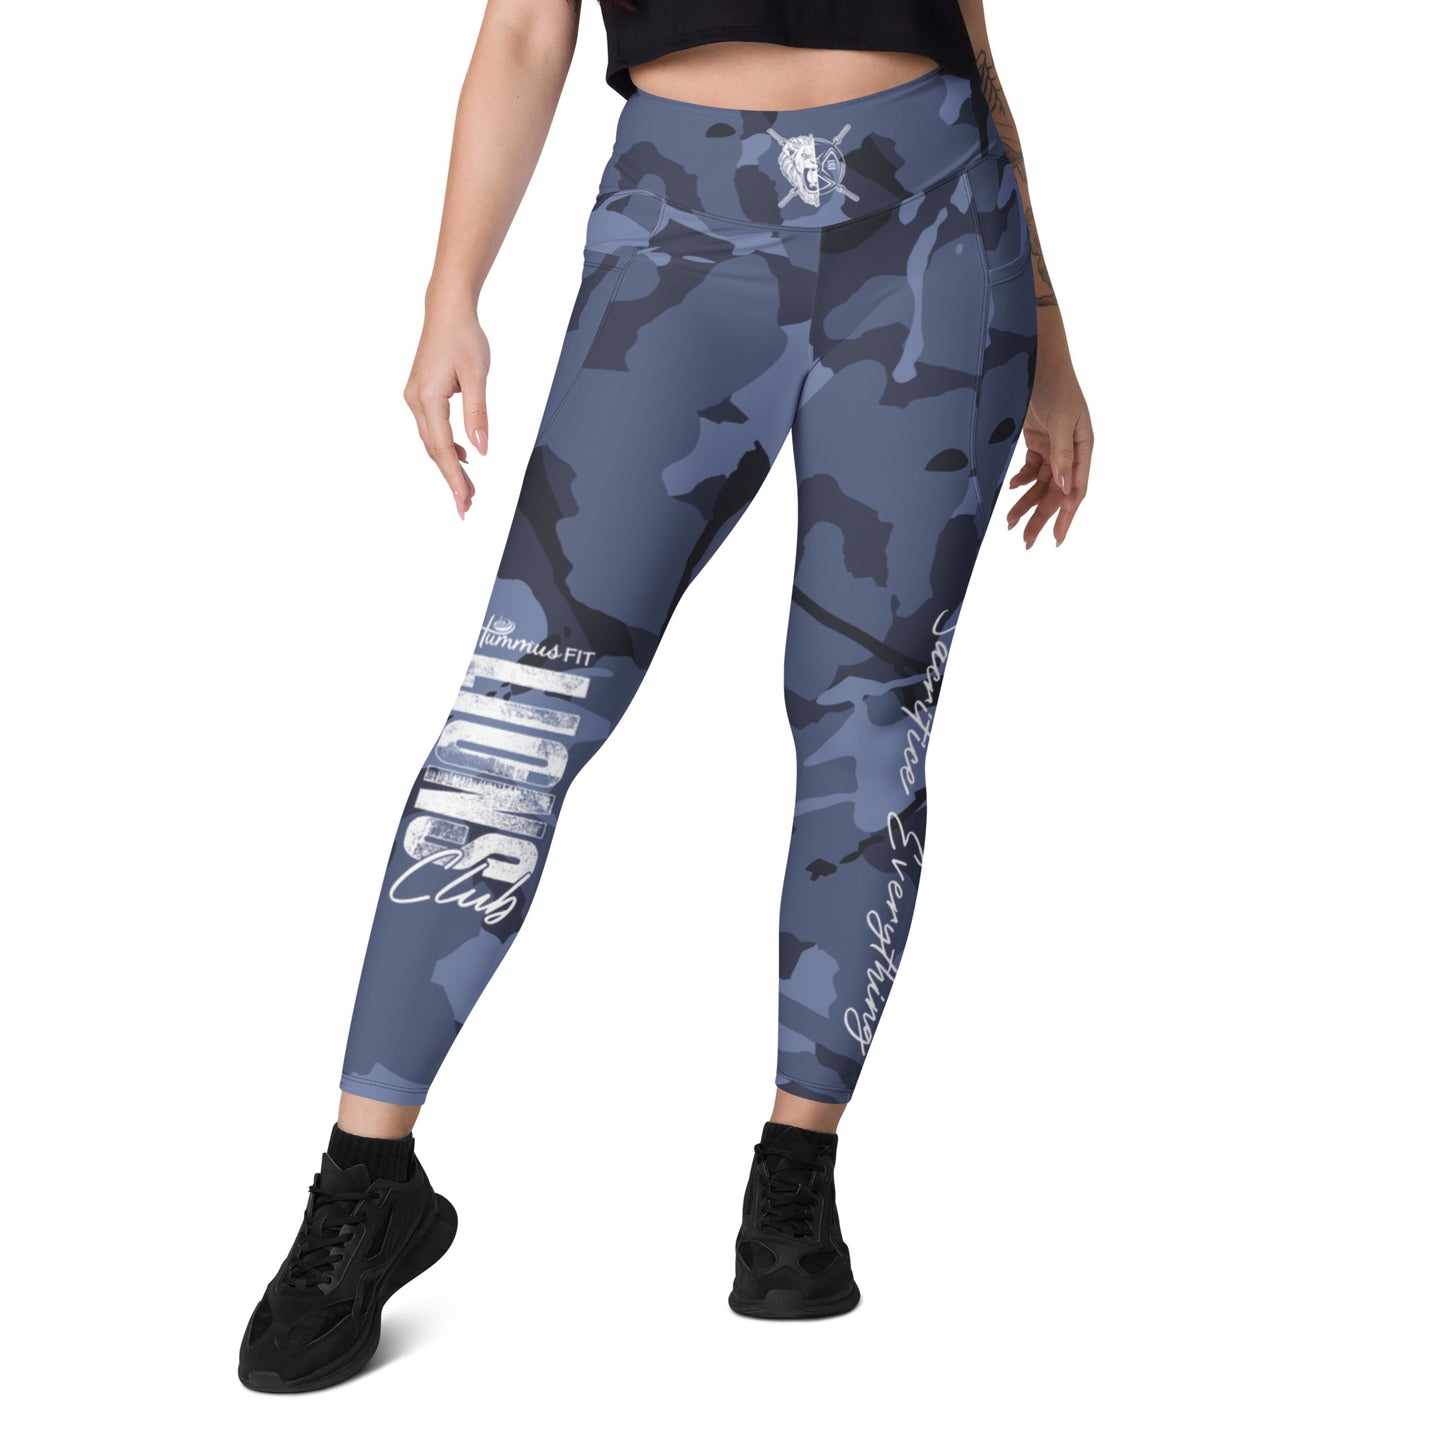 Compression High Waist Black And Grey Camo Leggings With Pockets